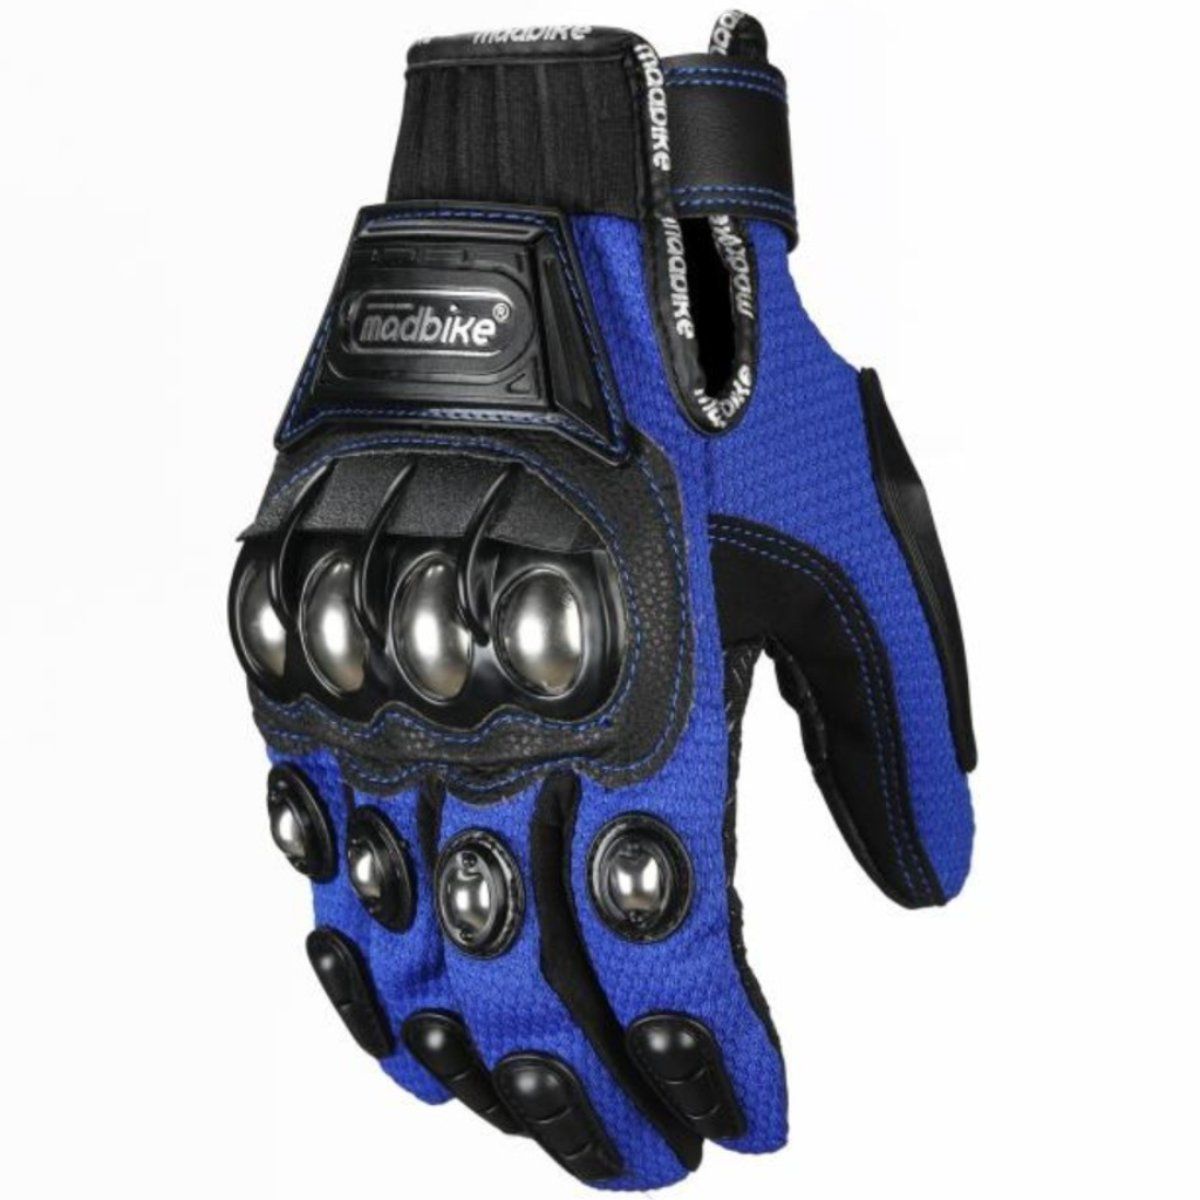 A pair of Madbike Motorcycle Gloves that provide hand protection.